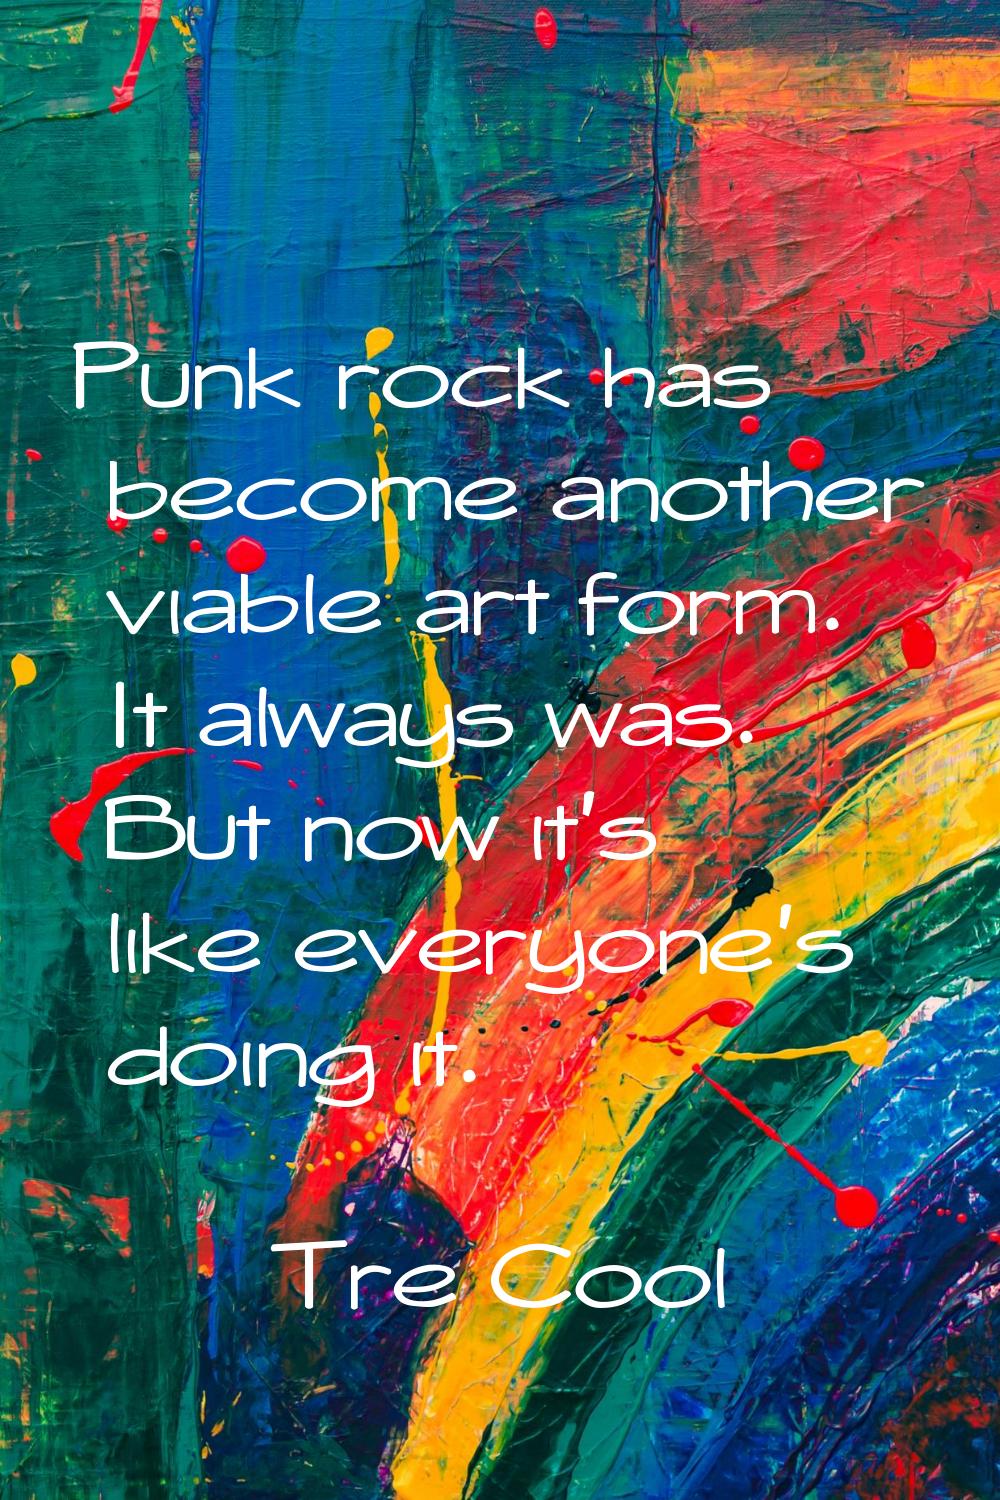 Punk rock has become another viable art form. It always was. But now it's like everyone's doing it.